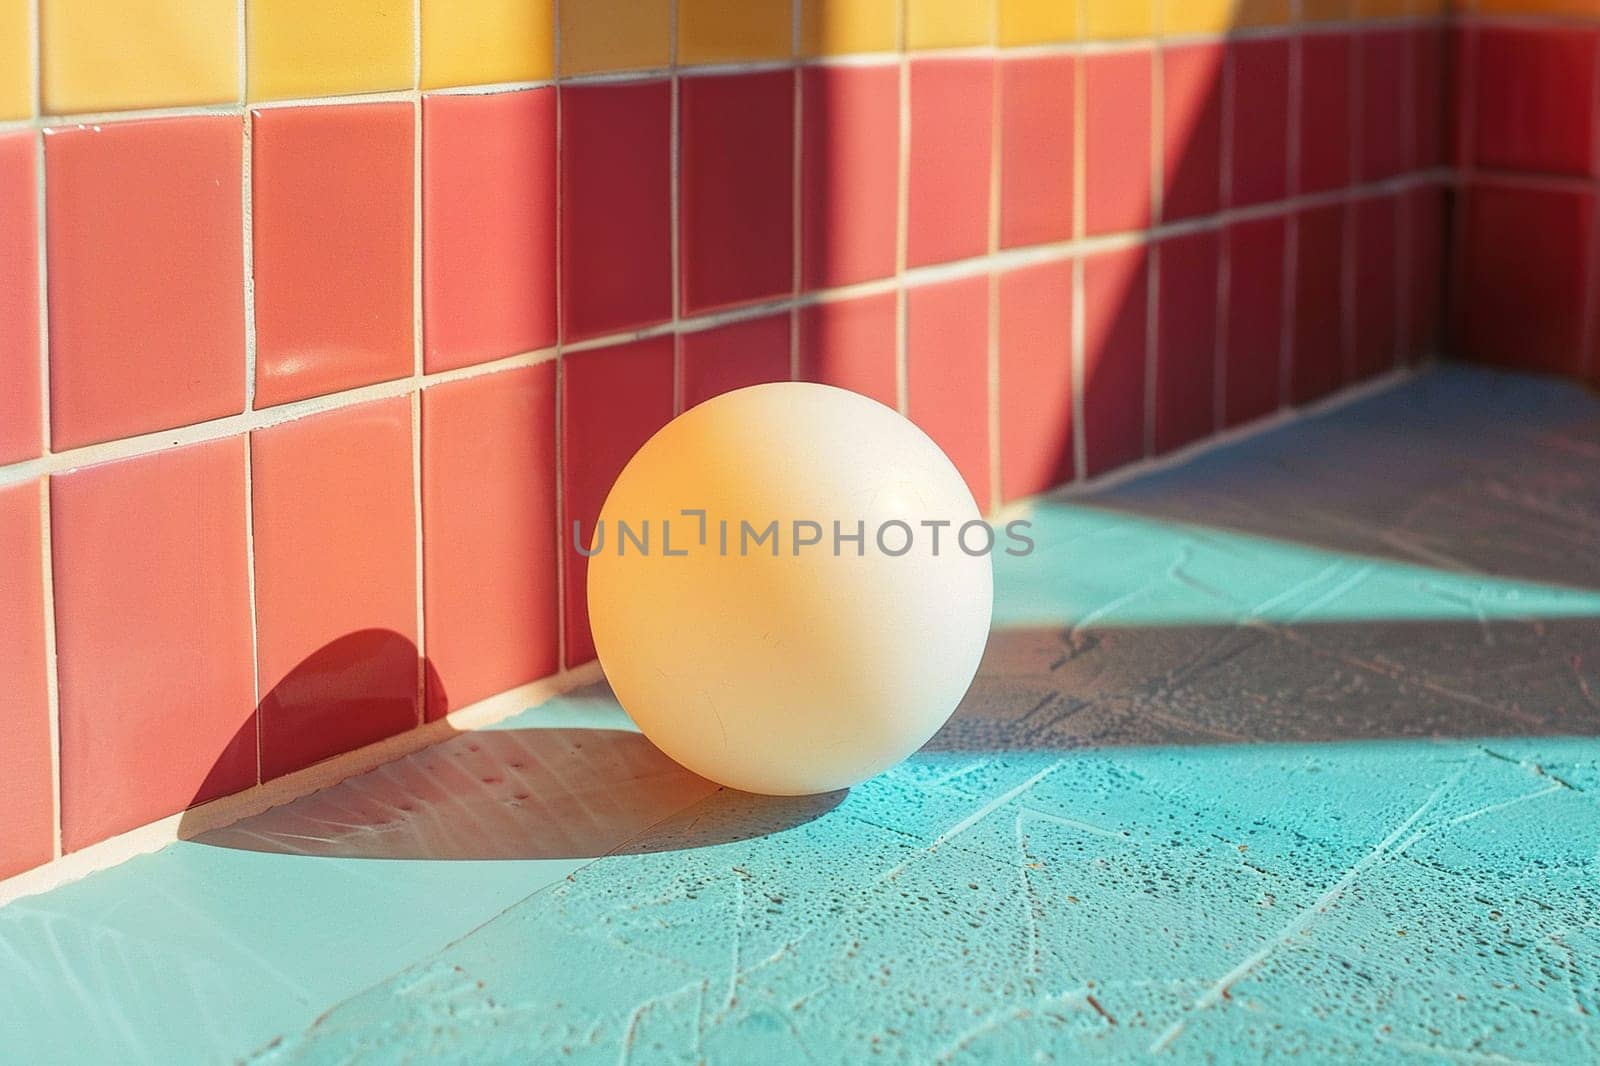 White ball for table tennis and ping pong on a background of a grid.